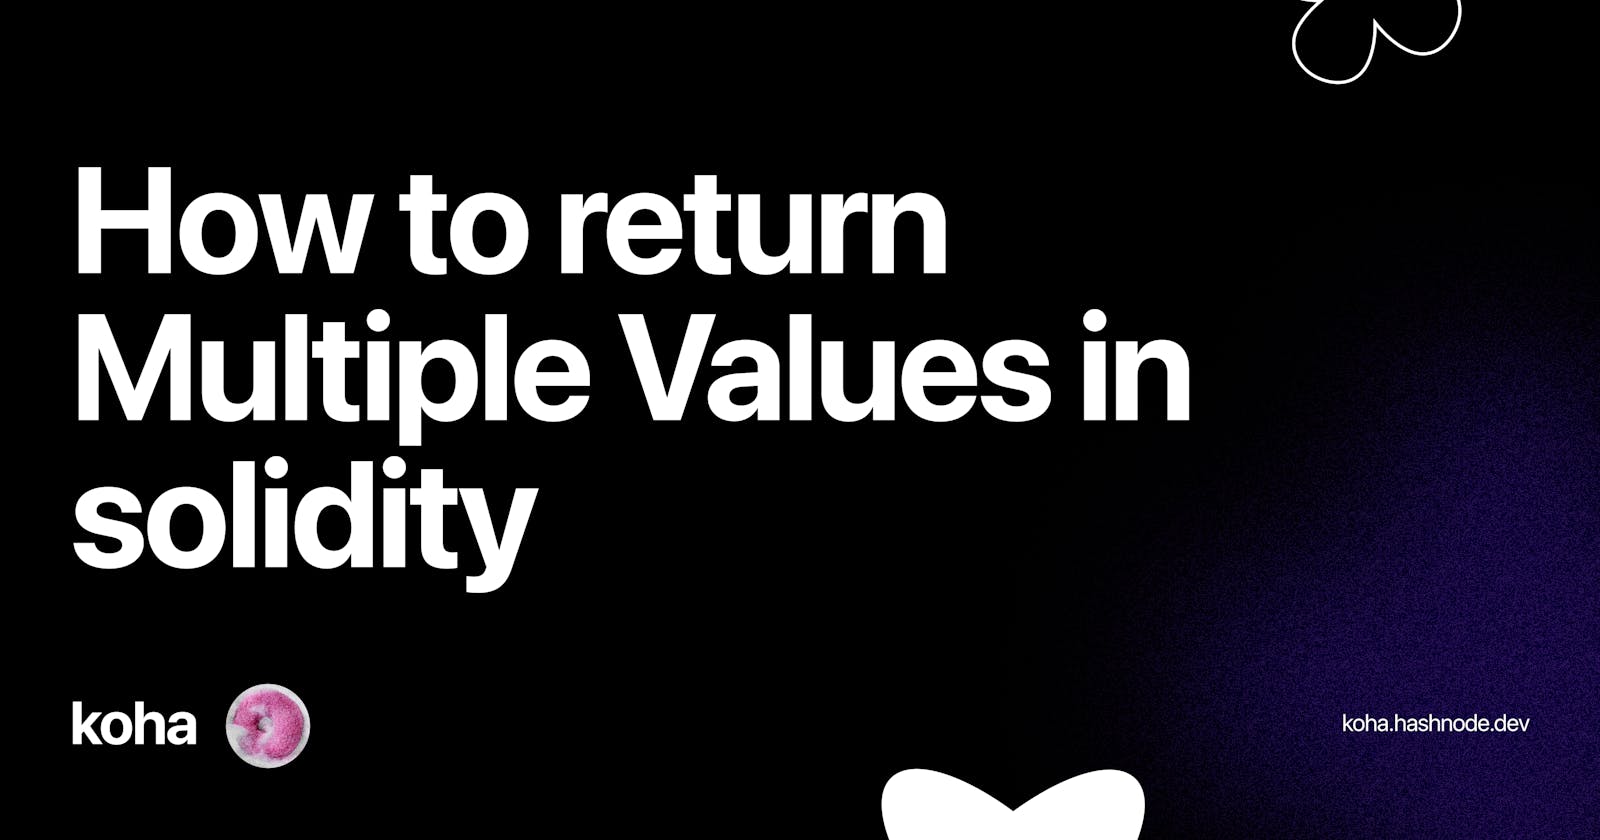 Here's how to return Multiple Values in solidity